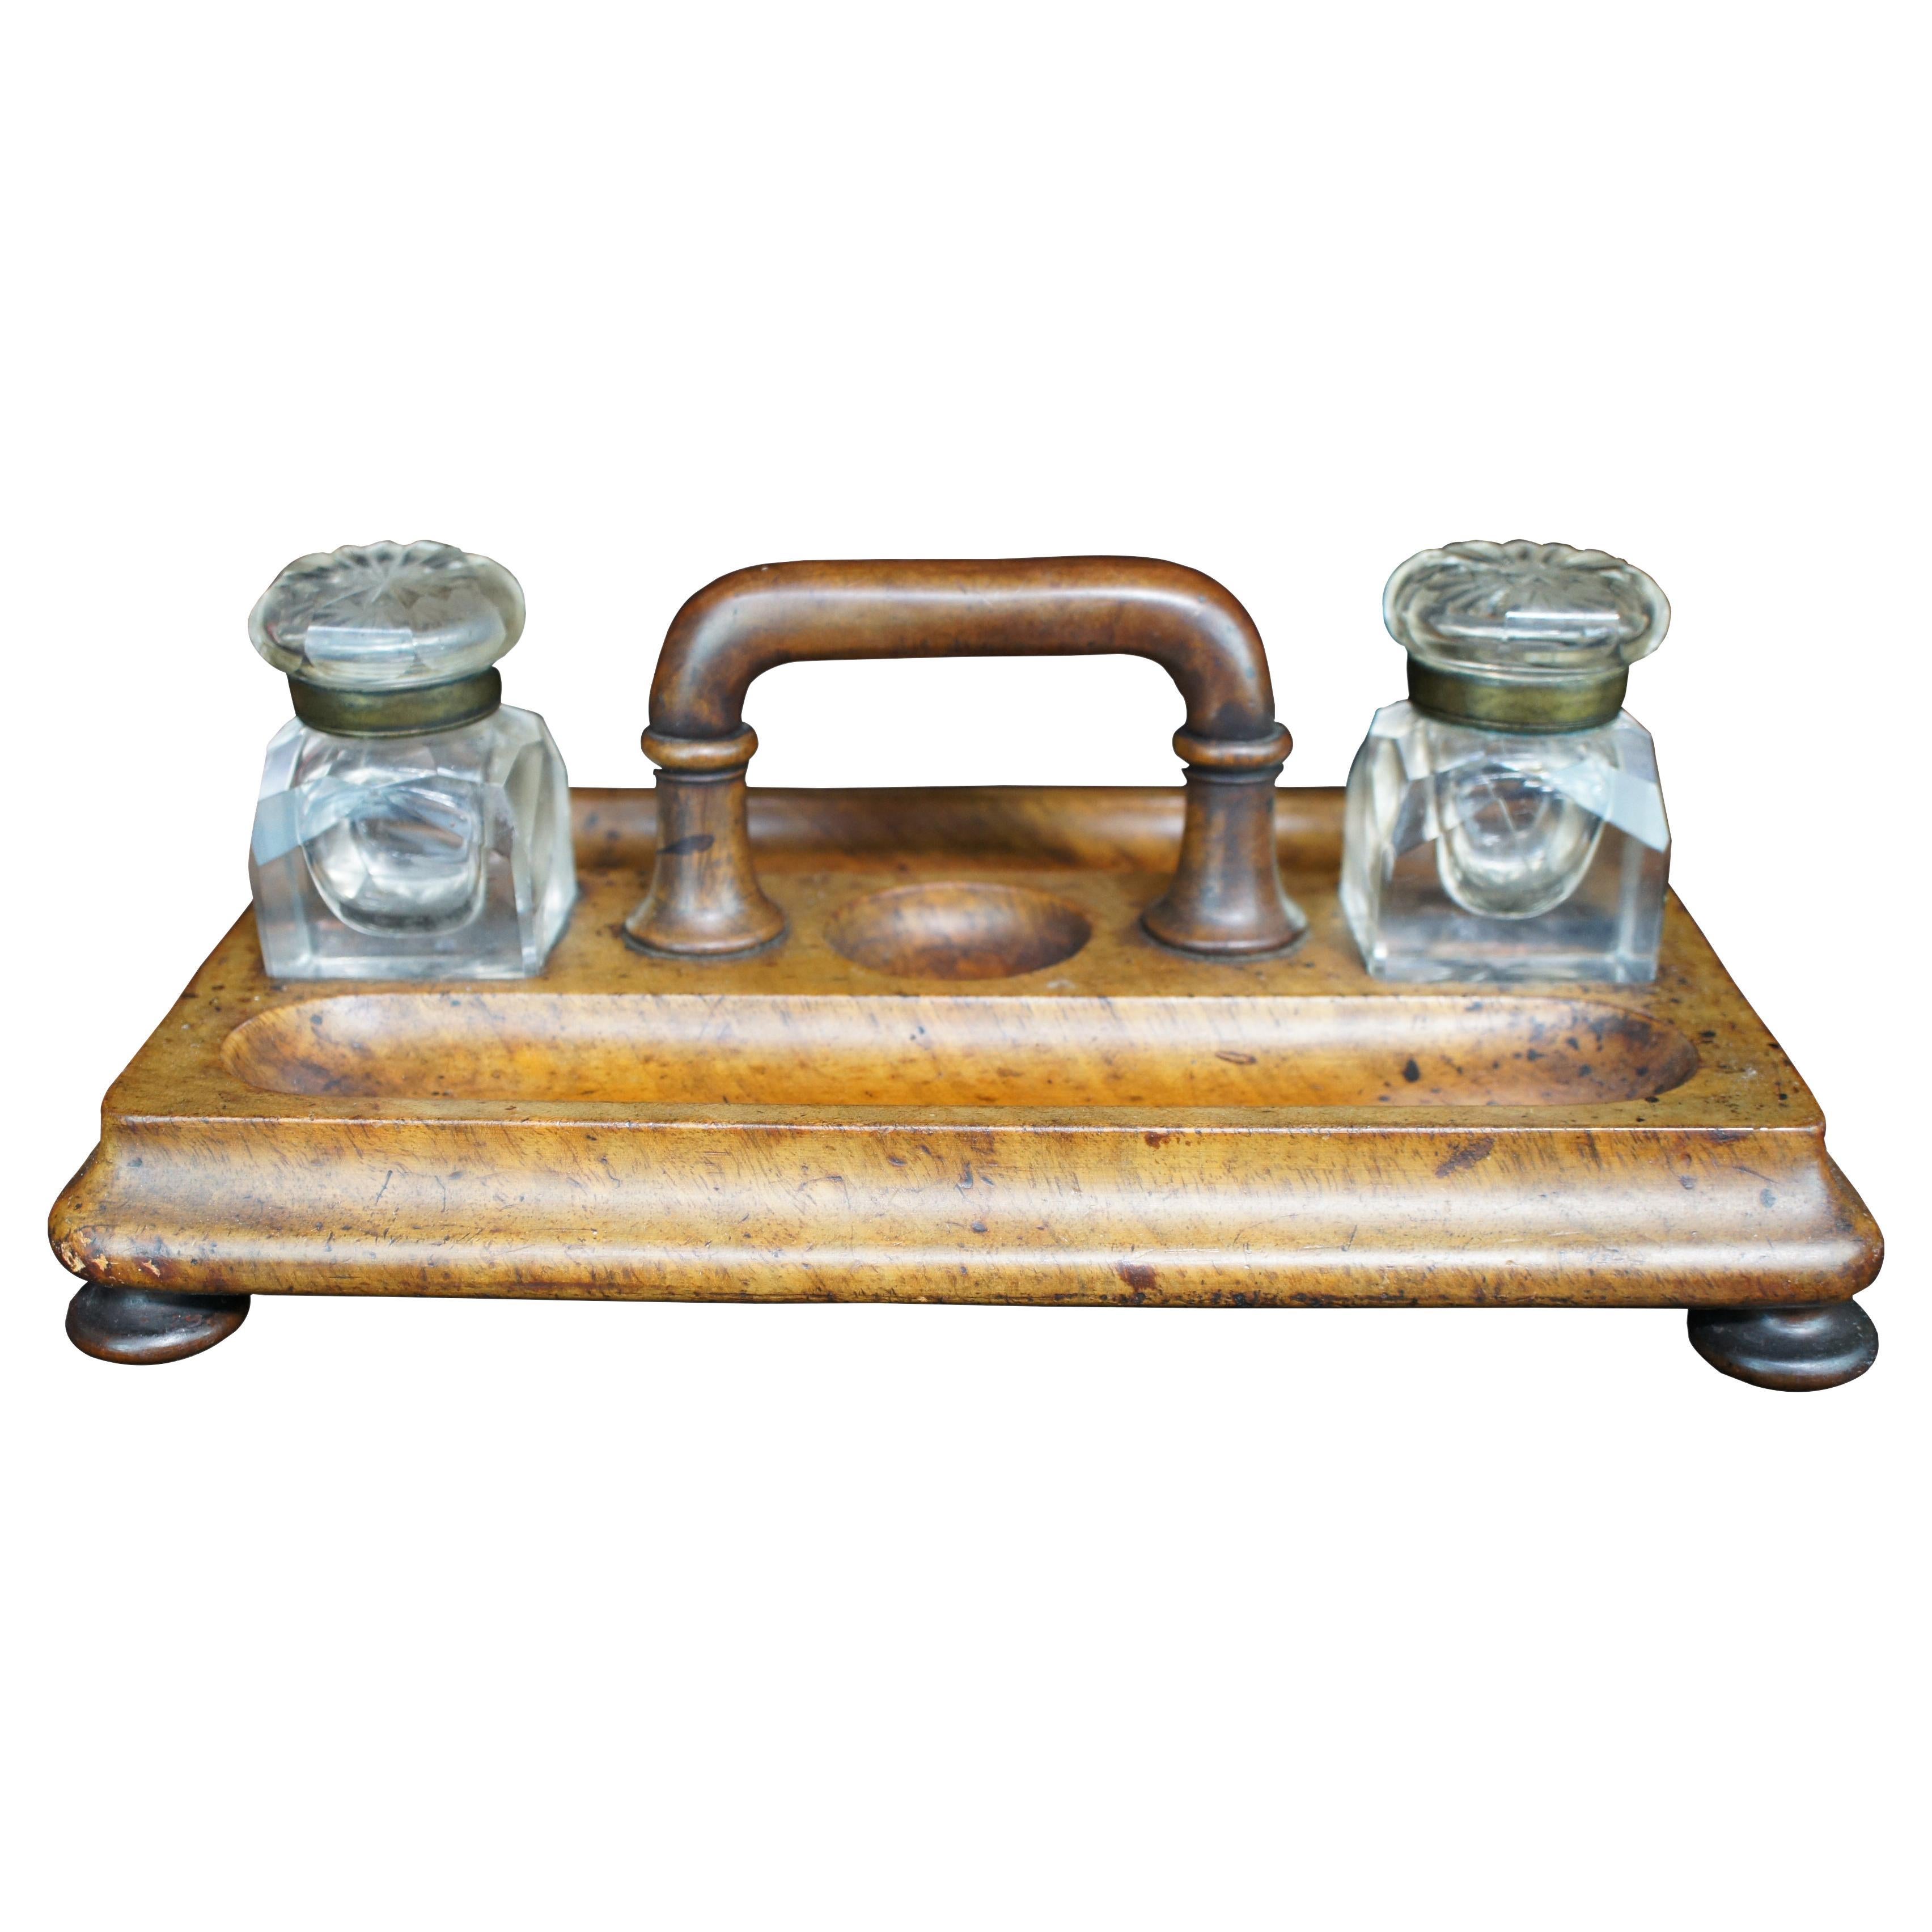 Antique Edwardian Walnut Double Inkwell Handled Footed Writing Desktop Caddy